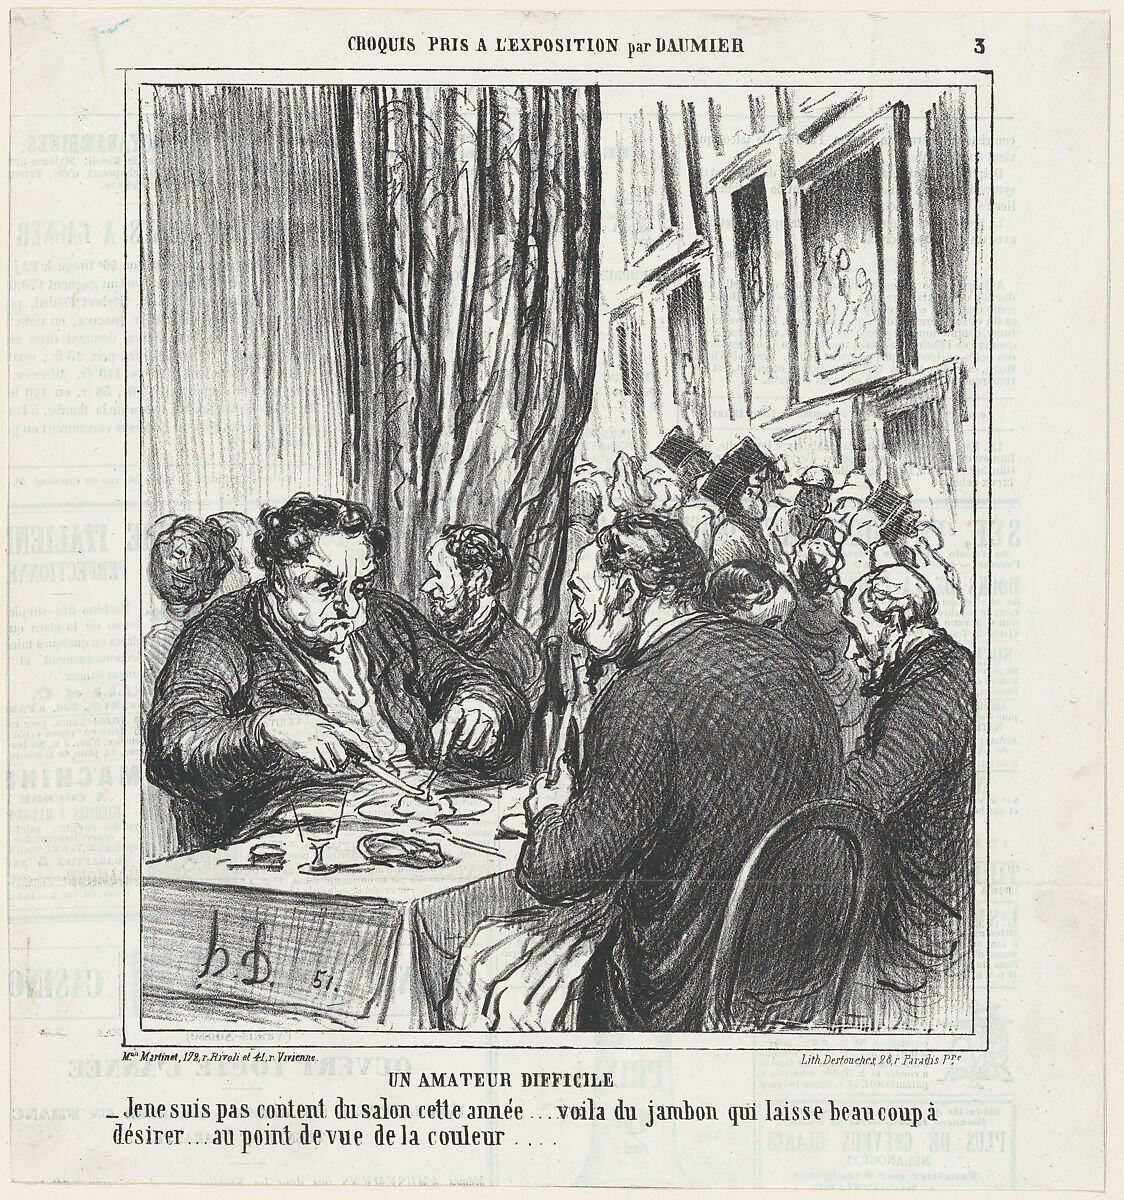 A difficult patron of the arts, from 'Exhibition sketches,' published in Le Charivari, June 17, 1864, Honoré Daumier (French, Marseilles 1808–1879 Valmondois), Lithograph on newsprint; second state of two (Delteil) 